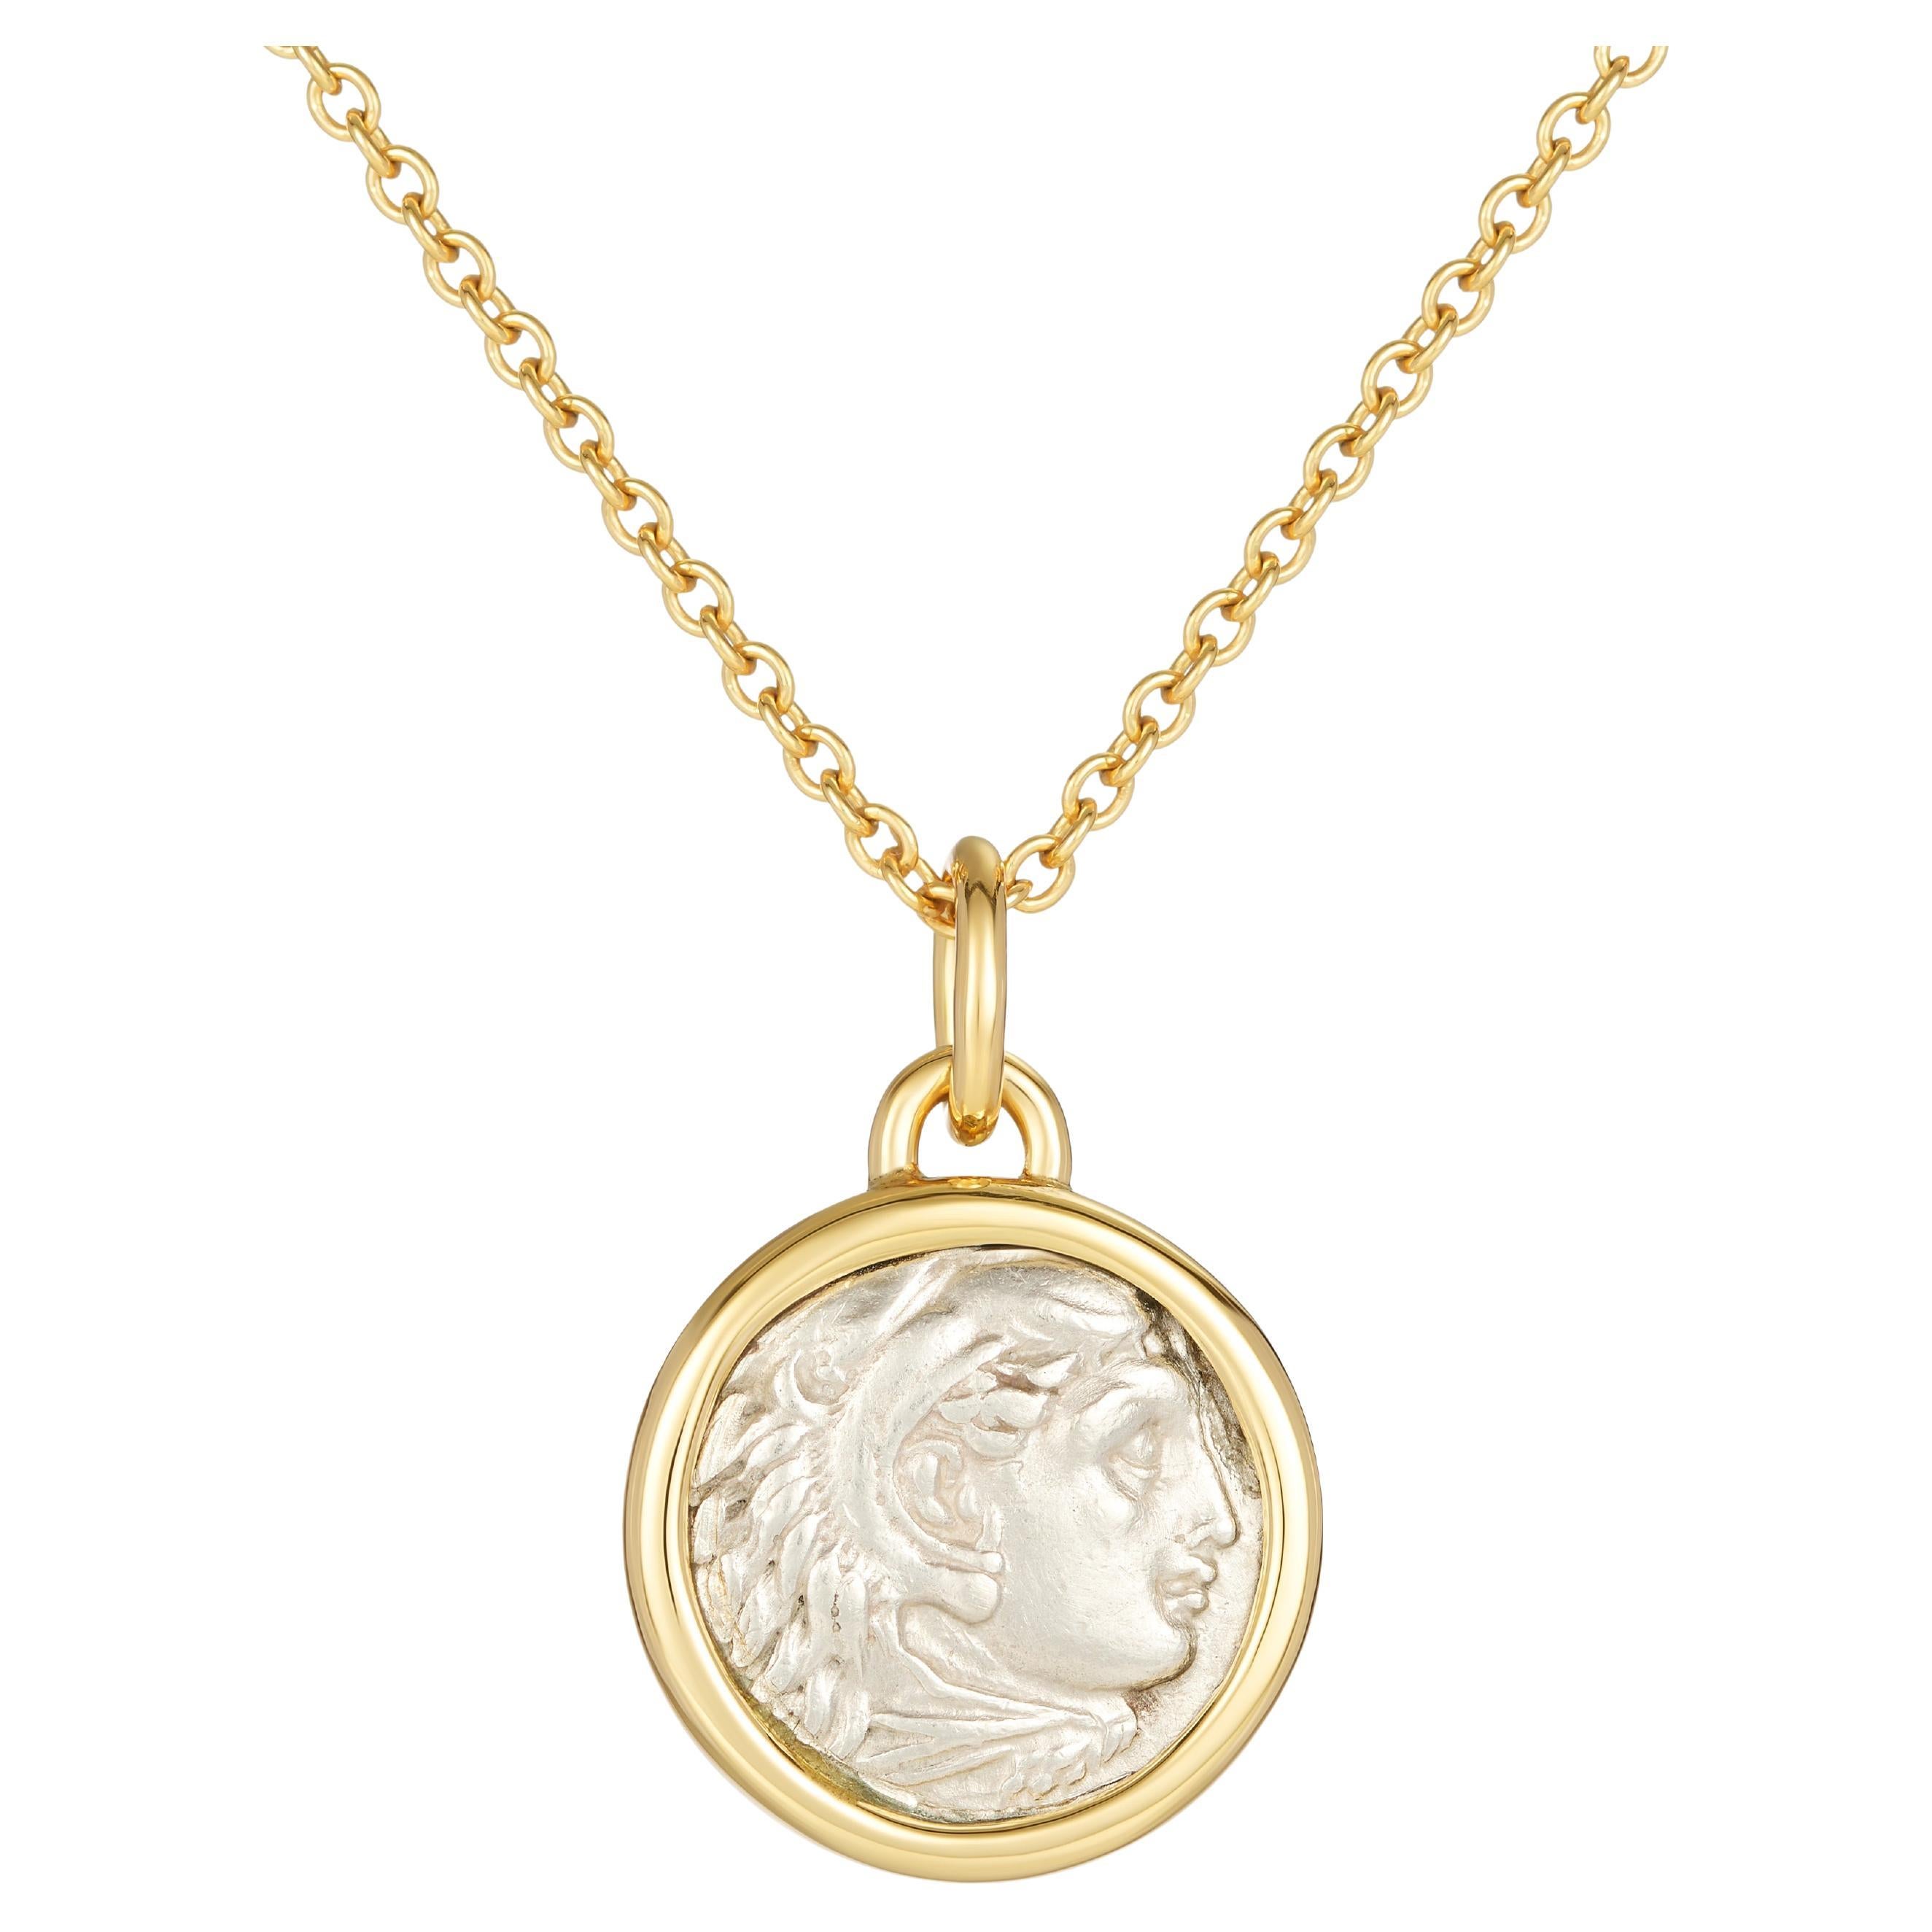 Dubini Alexander the Great Silver Coin Pendant 18K Gold Necklace